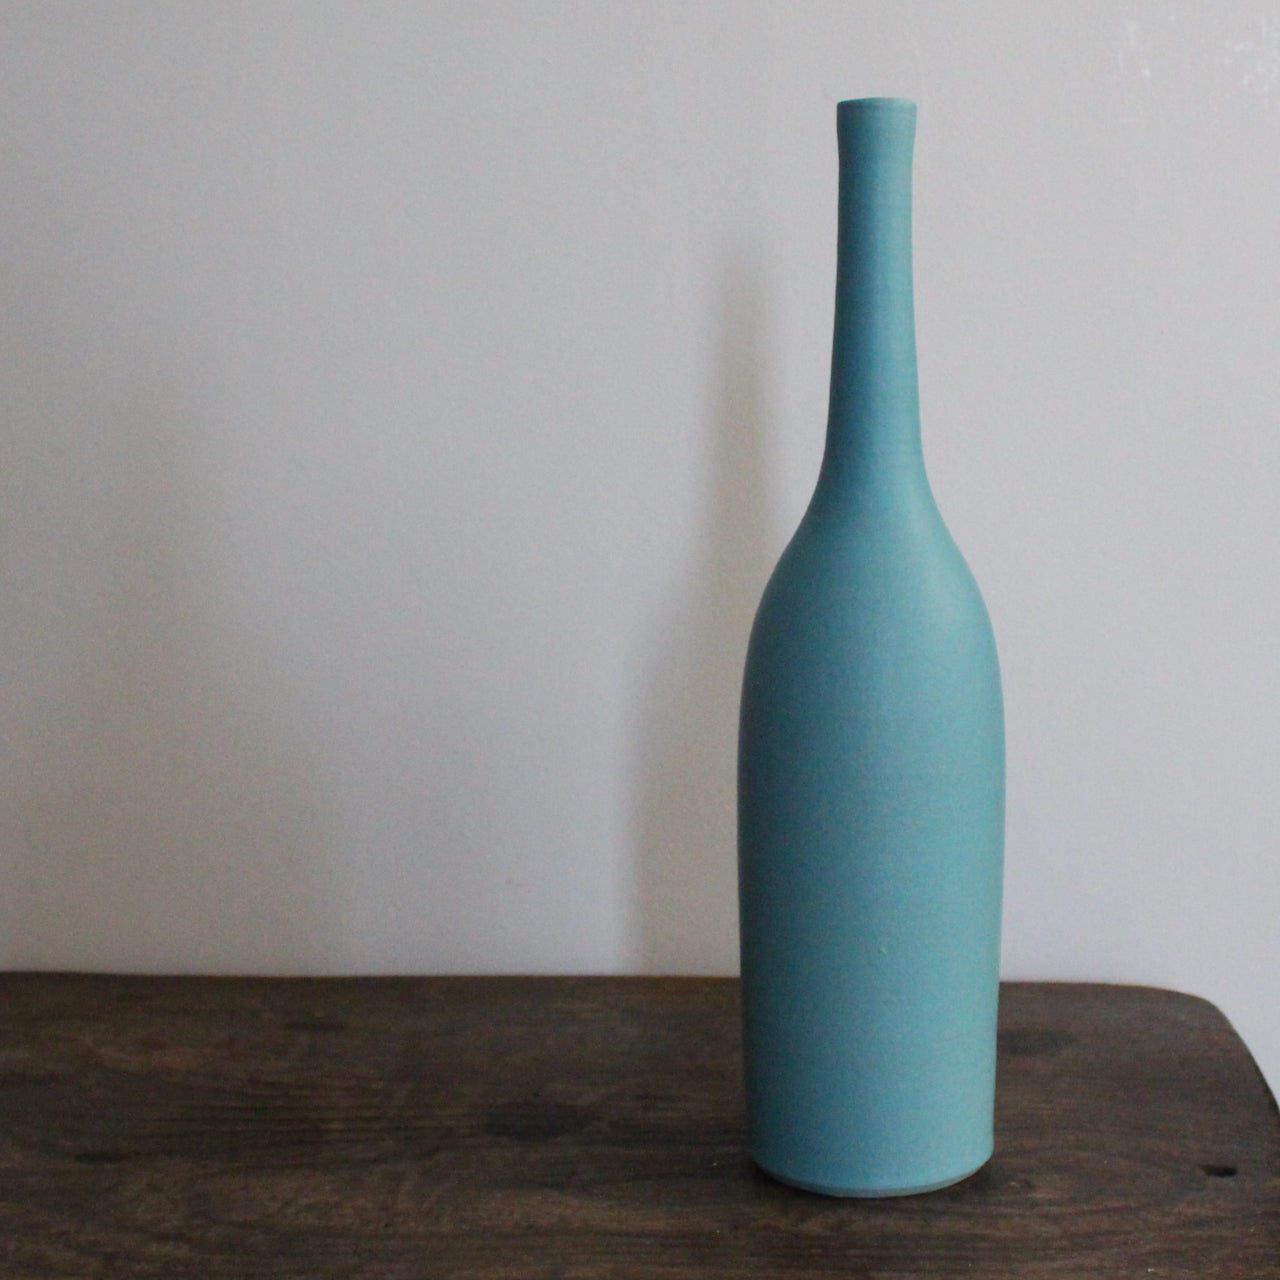 ceramic bottle by ceramic artist Lucy Burley in turquoise glaze